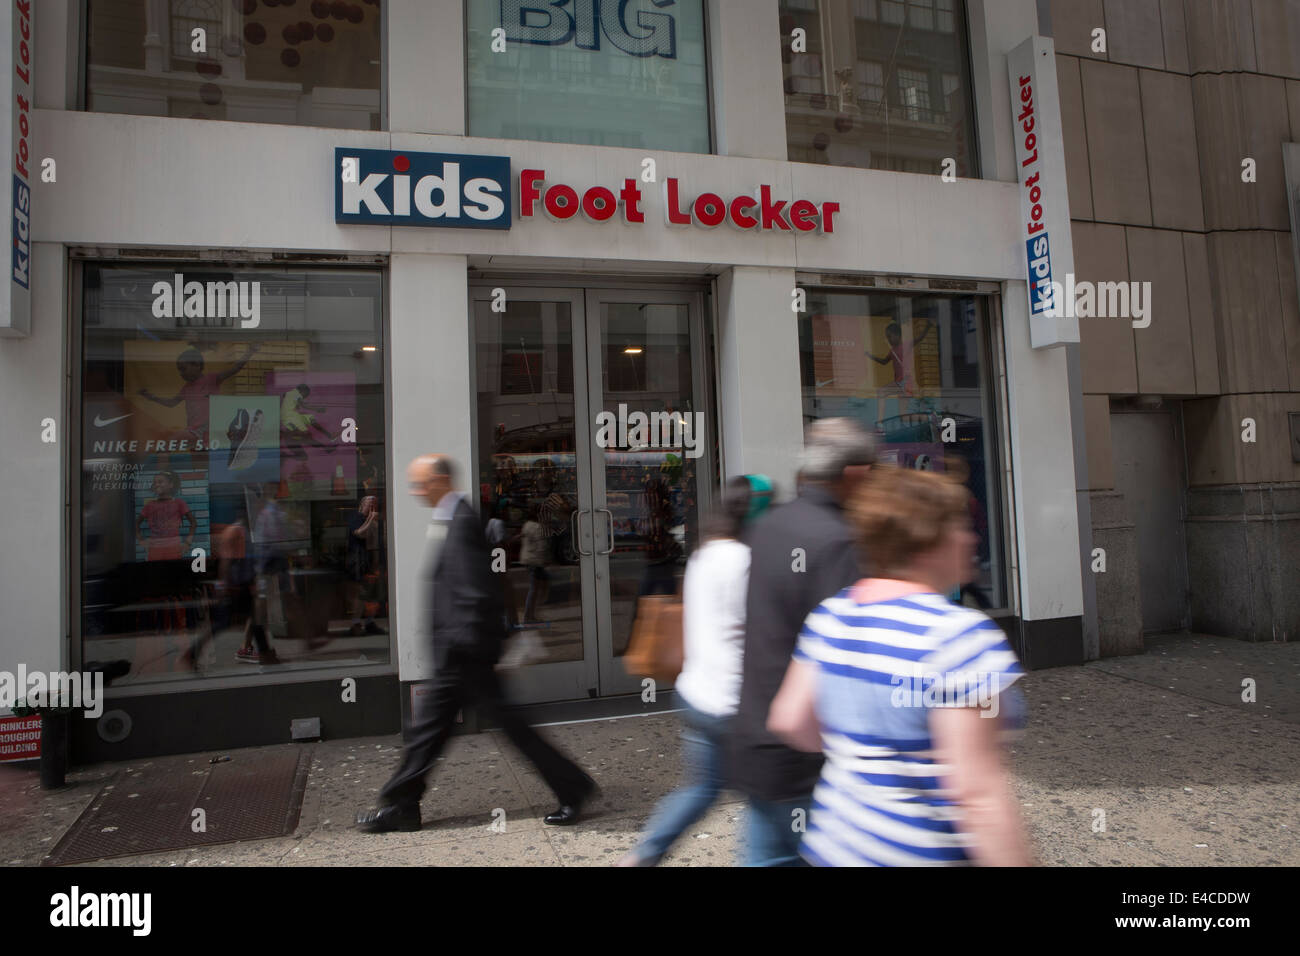 A Kids Foot Locker store is pictured in the New York City borough of Manhattan, NY Stock Photo